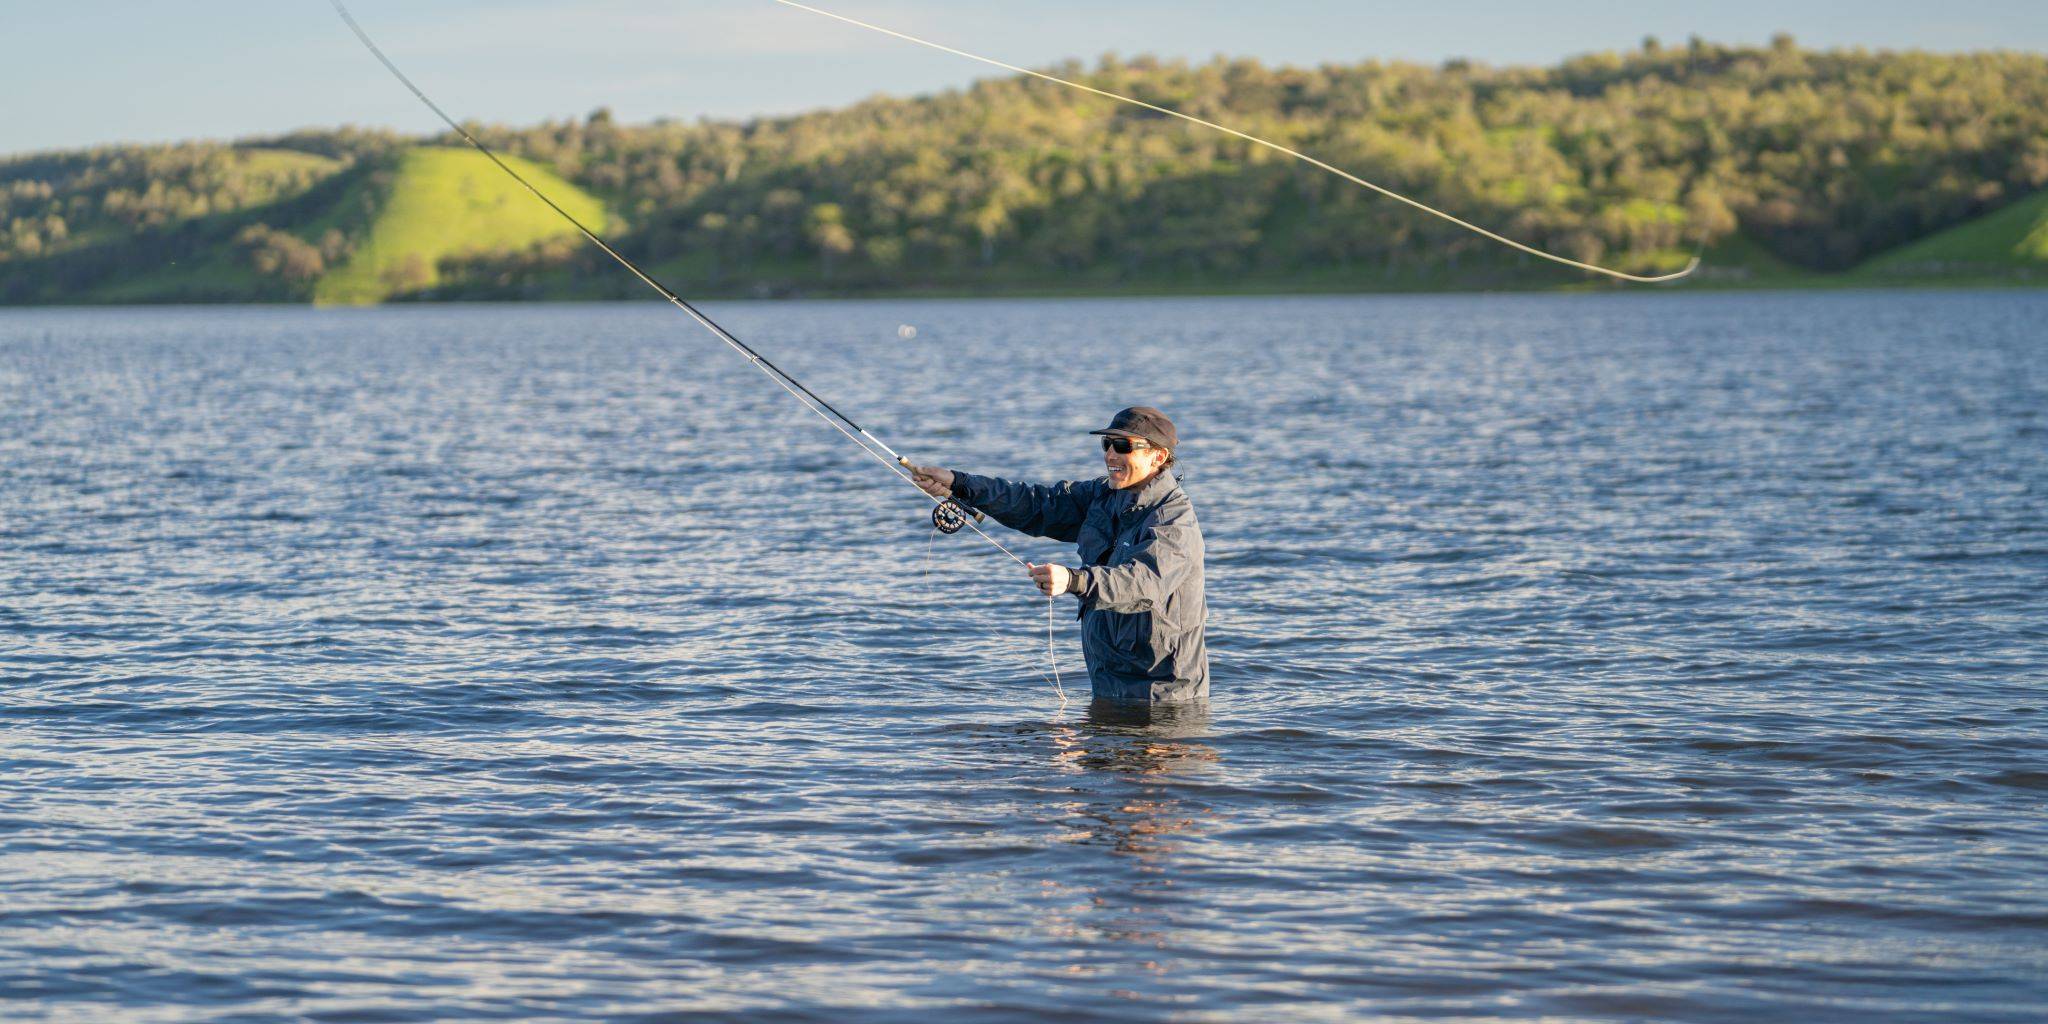 Chris standing in a huge lake casting a fishing line.